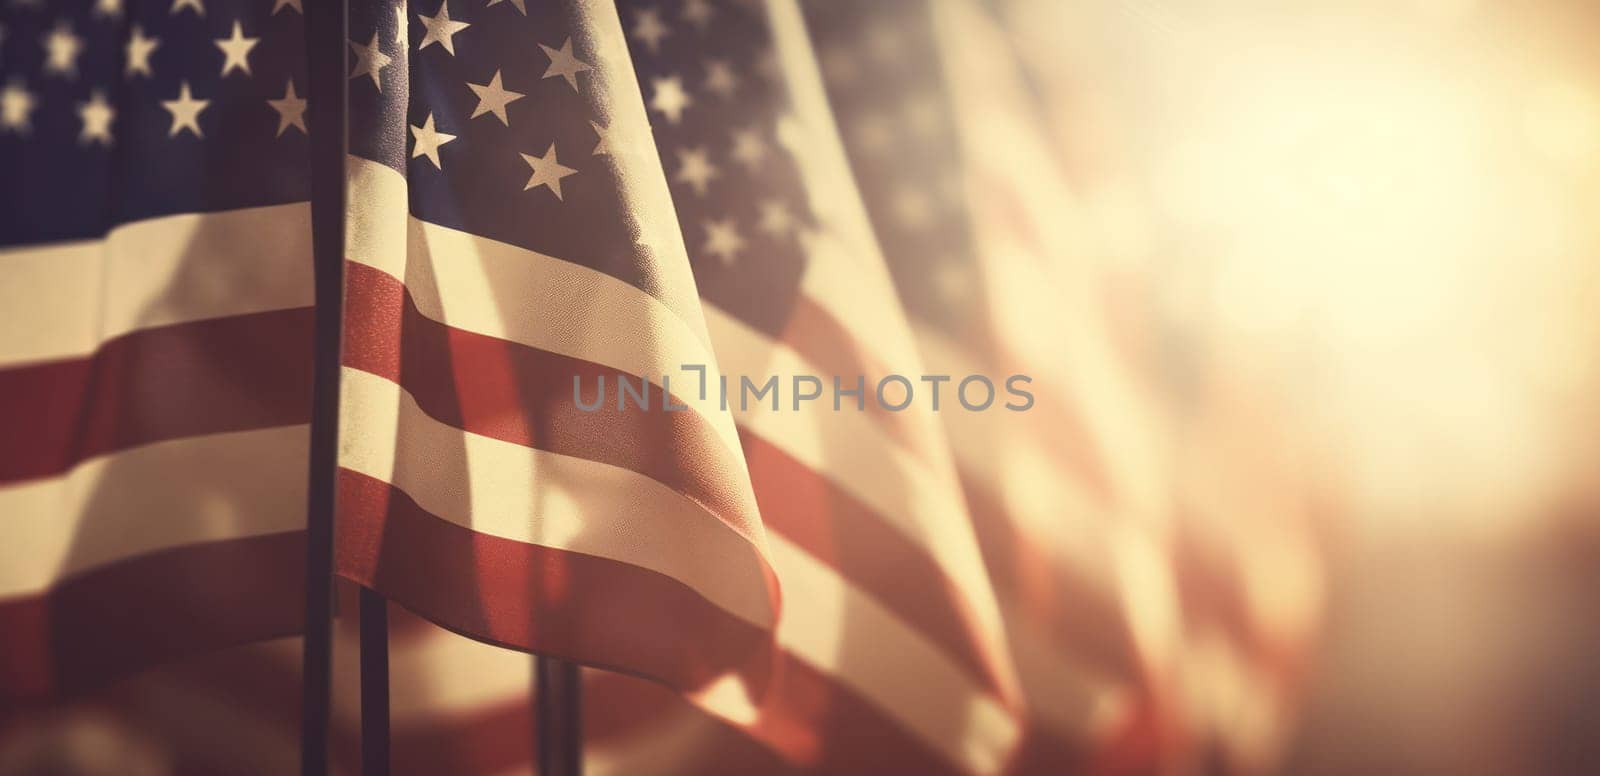 United Emblems of Freedom: A Closeup Photograph of the Patriotic American Flag Waving in the Sunlit Sky